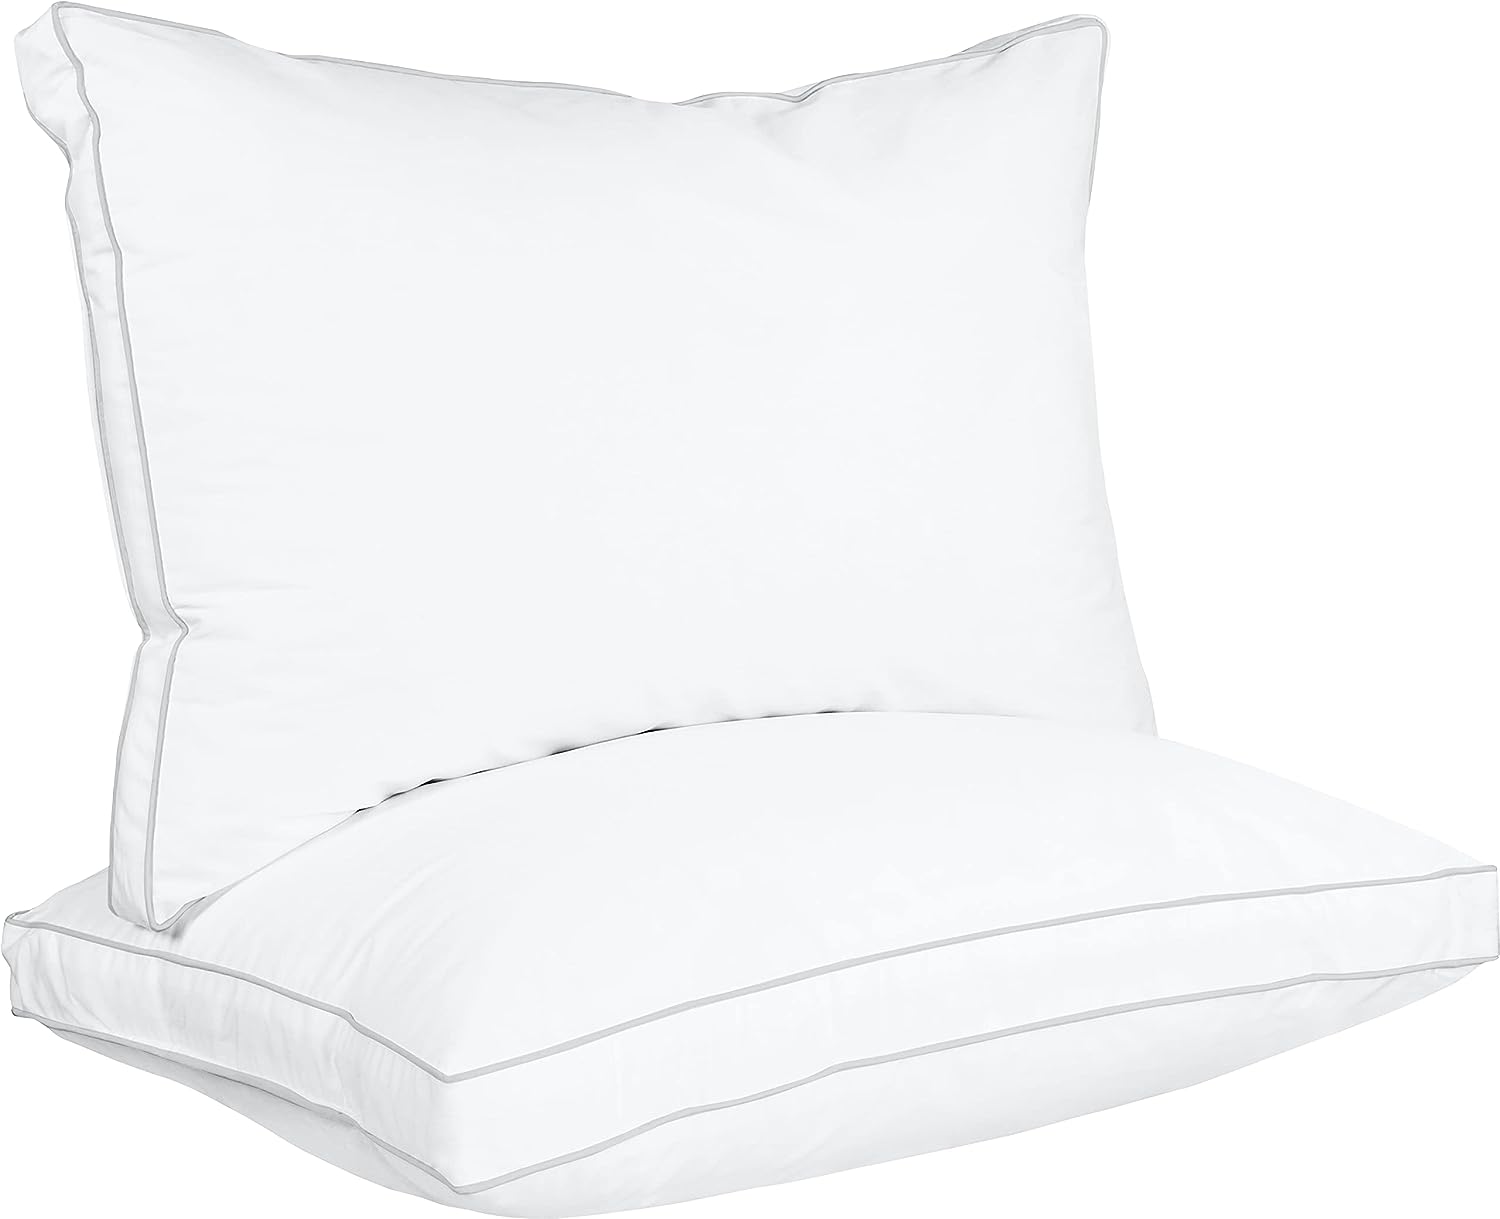  Utopia Bedding Throw Pillows Insert (Pack of 2, White) - 18 x 18  Inches Bed and Couch Pillows - Indoor Decorative Pillows : Home & Kitchen